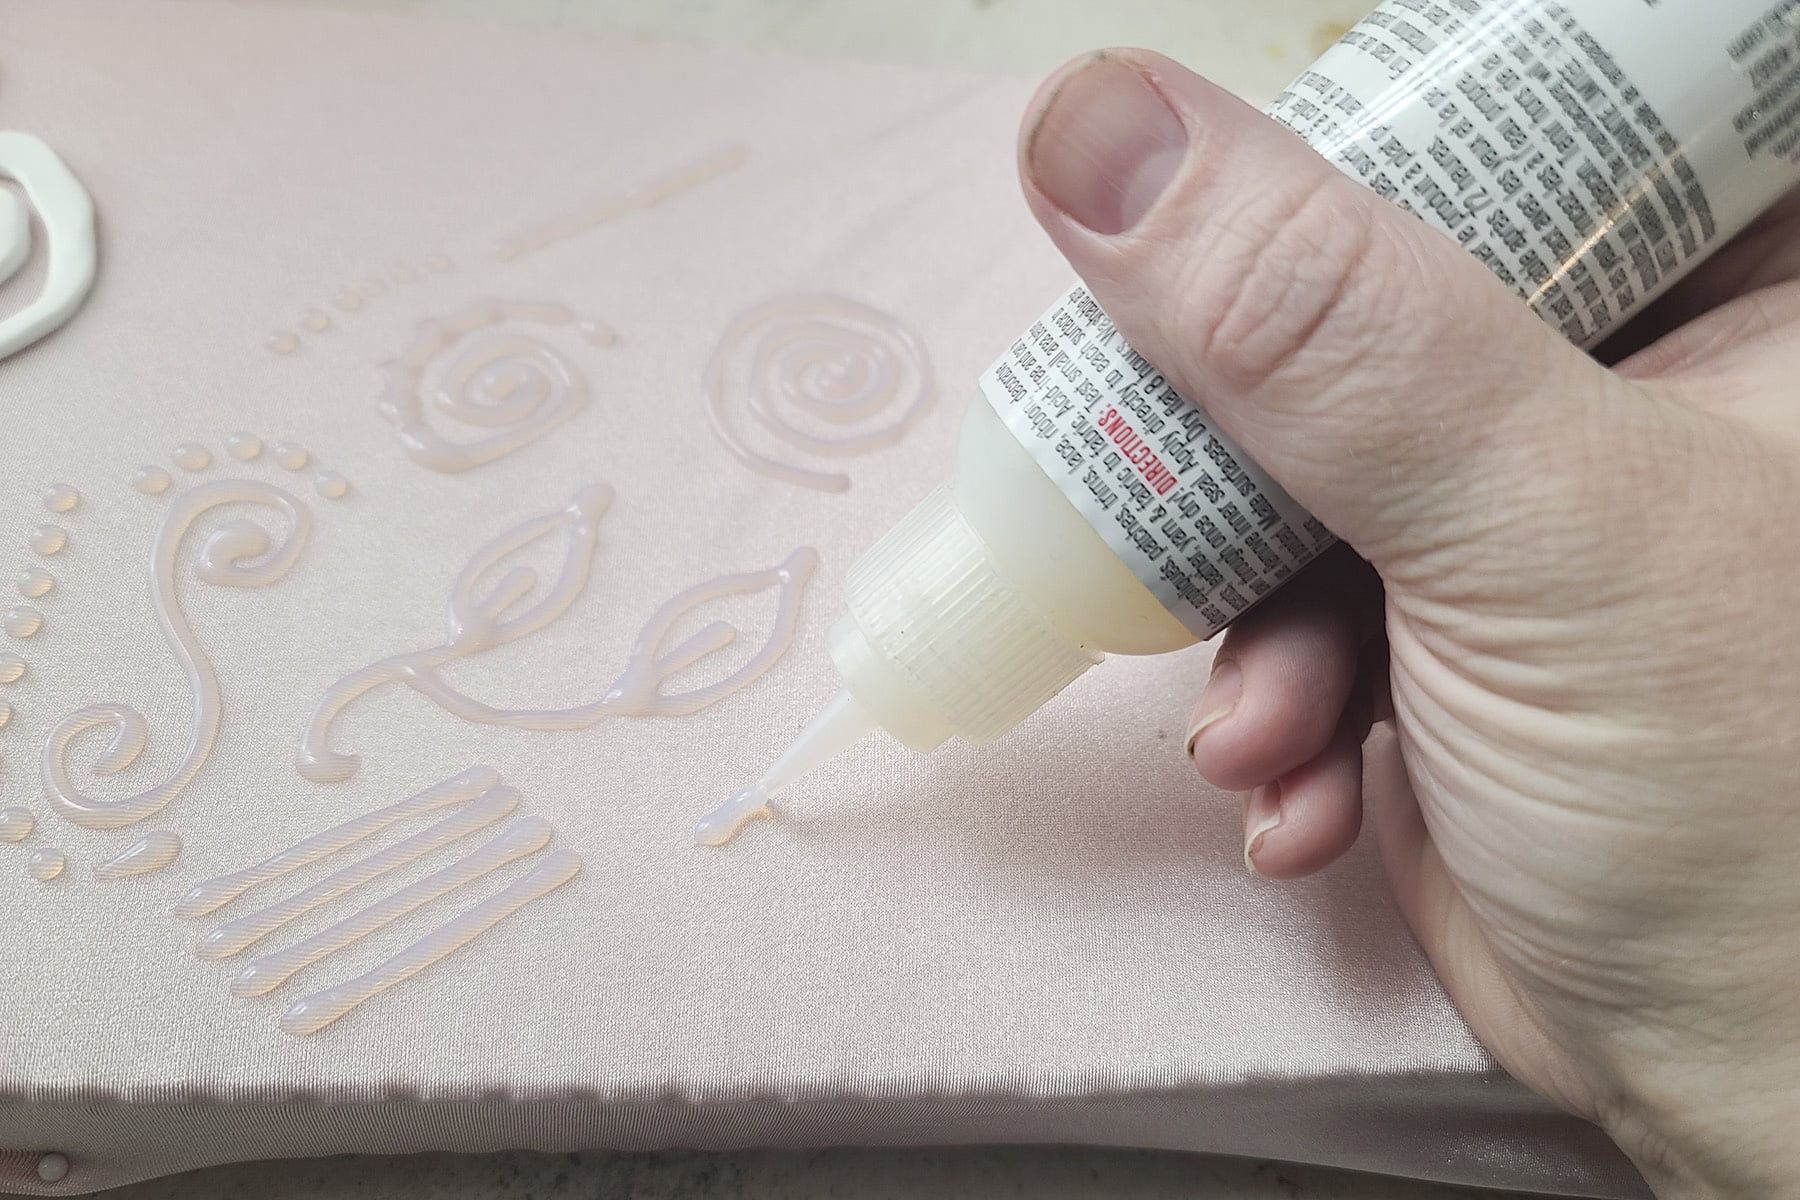 A tube of E-6000 fabri-fuse is being used to pipe designs on pale pink spandex.